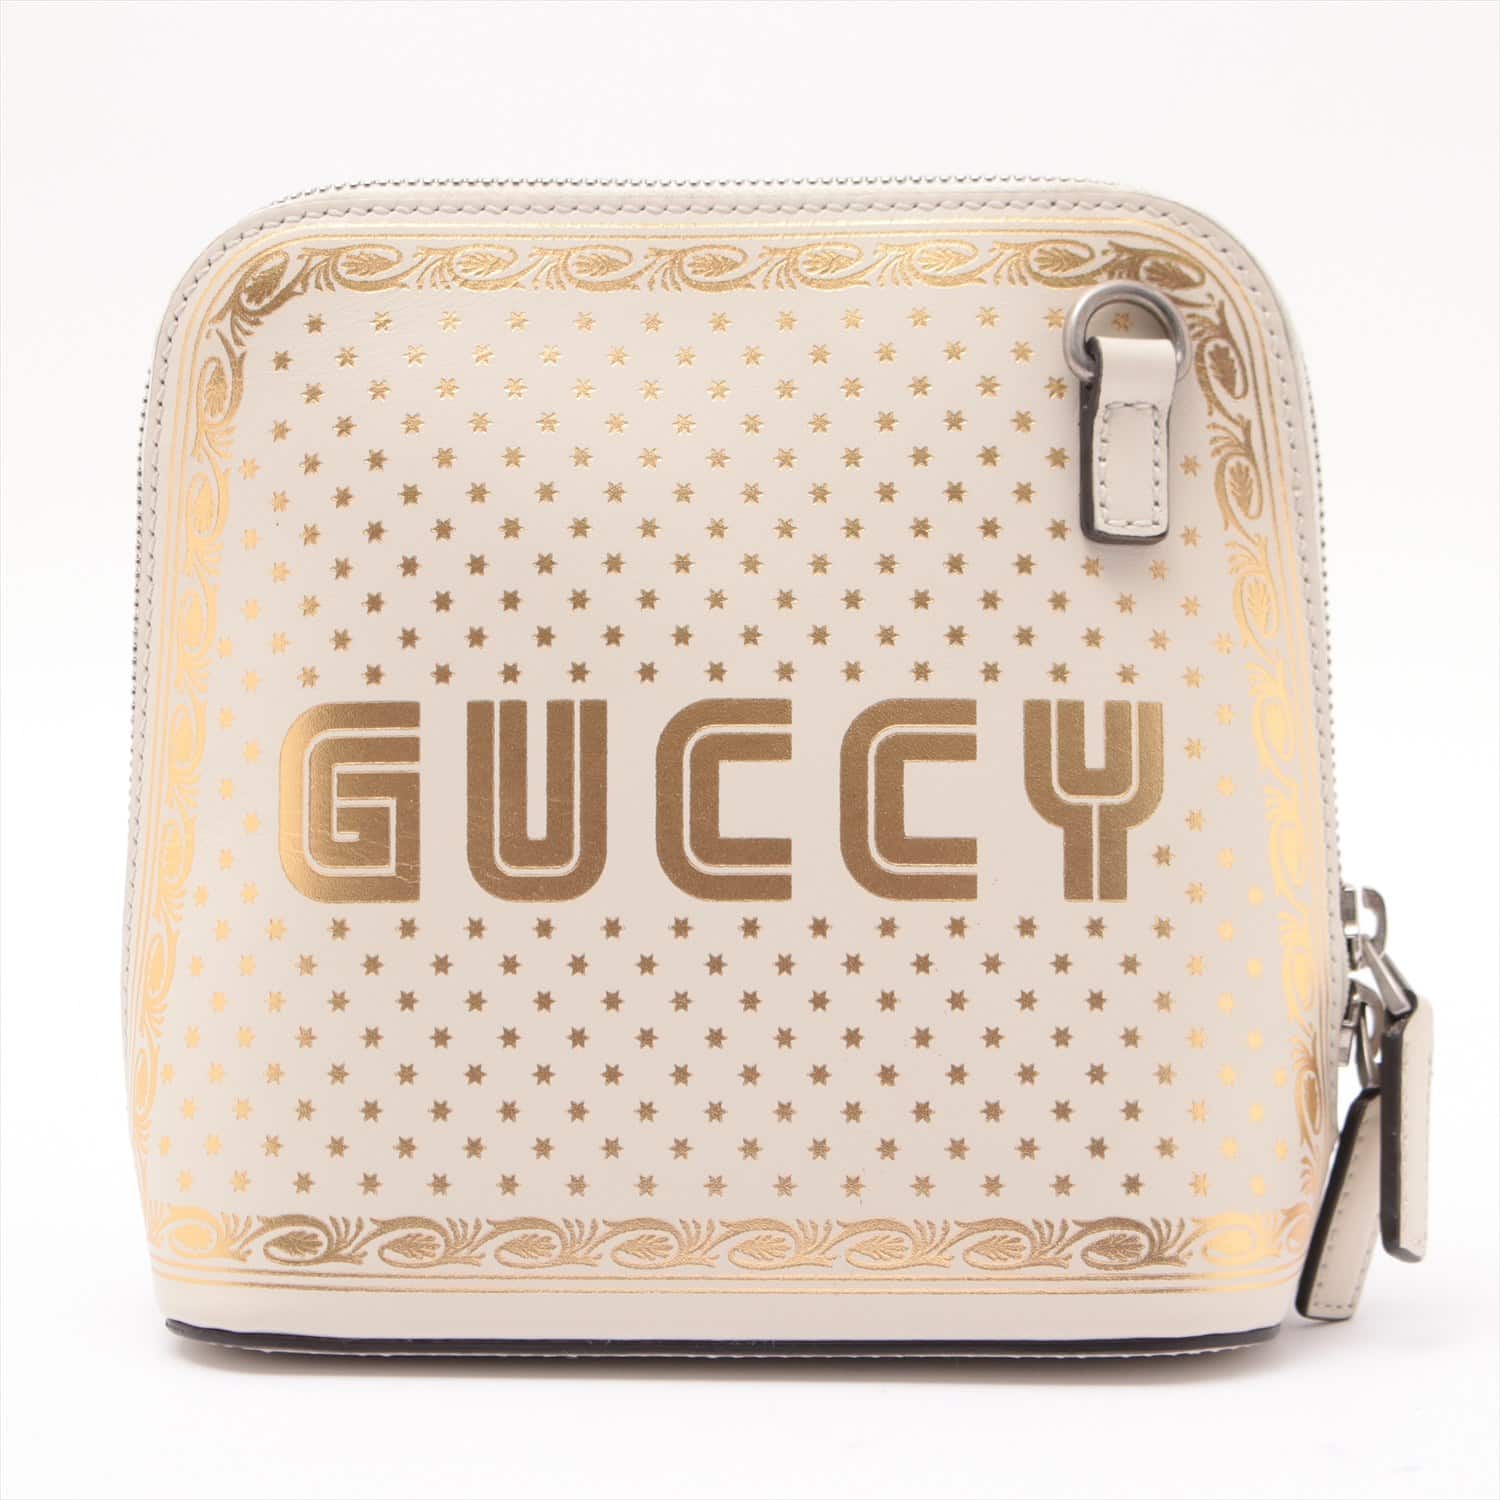 Gucci Leather Shoulder bag White 511189 Gussy print